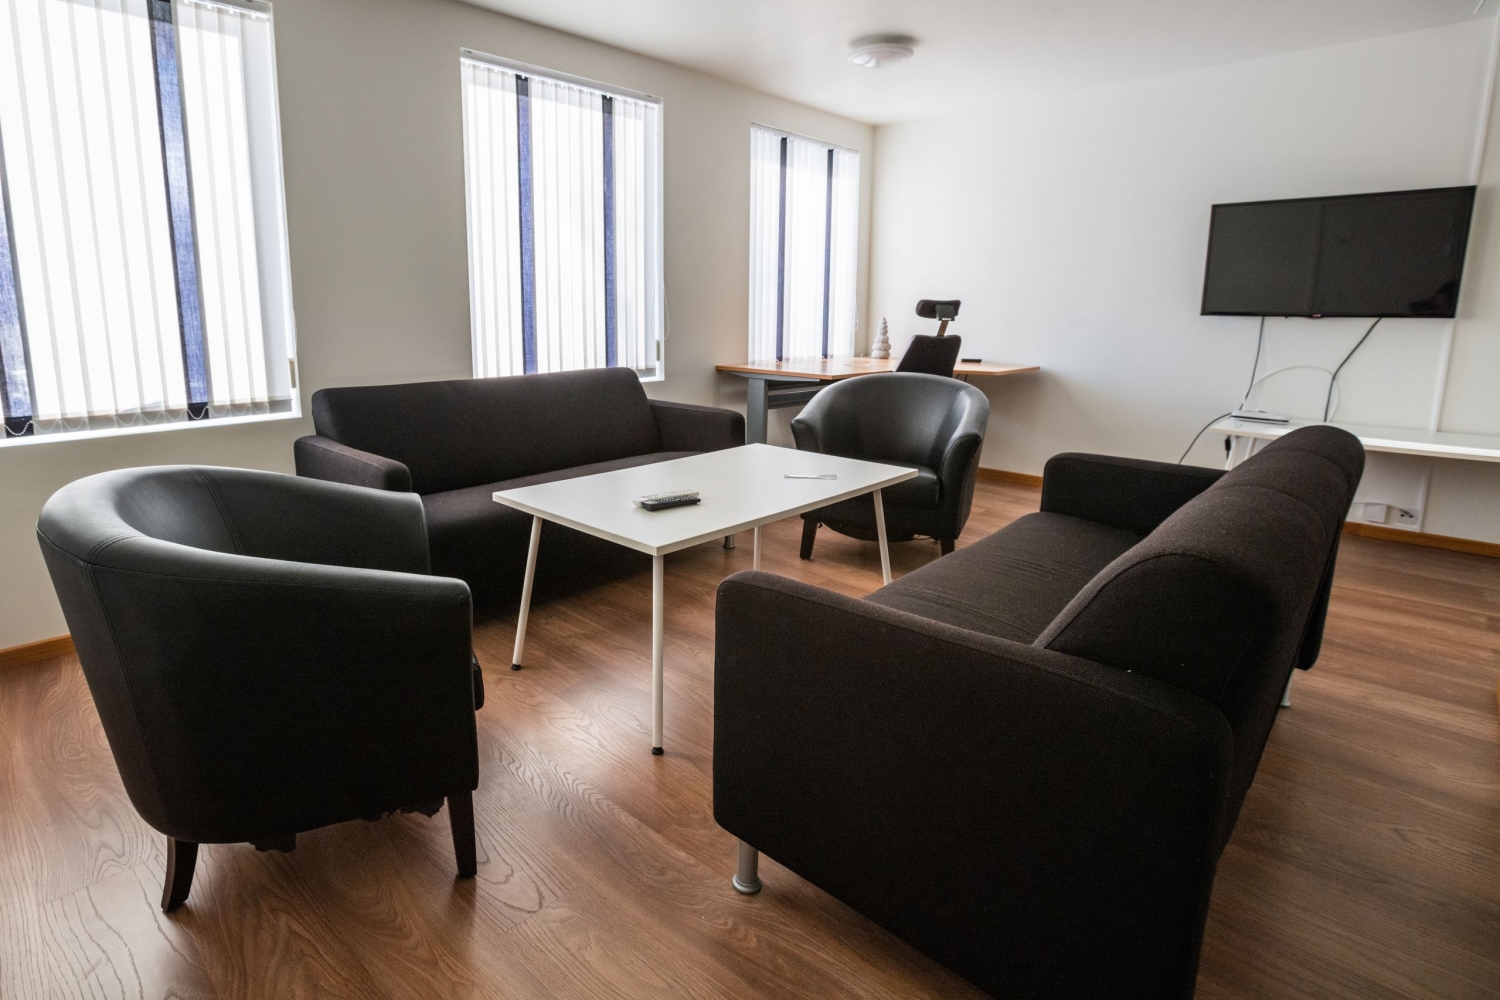 sofas and table in communal room